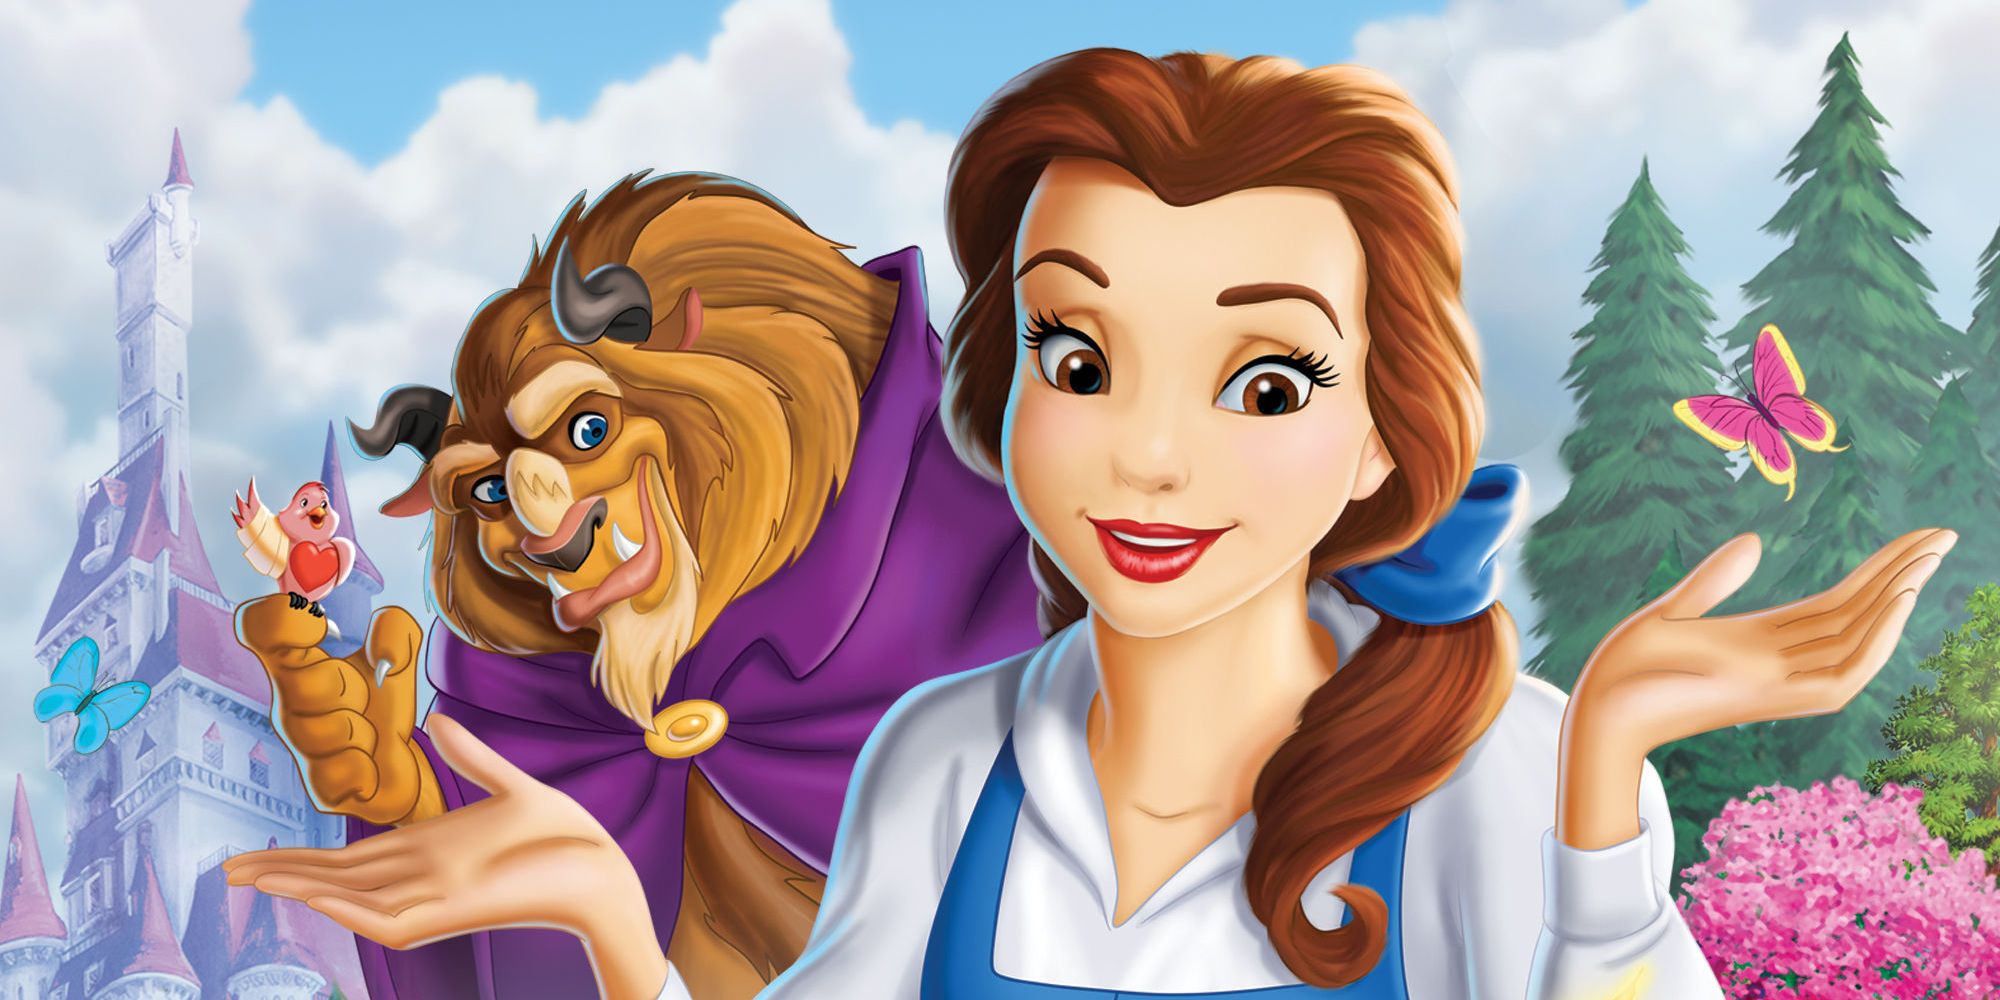 Belle's Magical World - Beauty and the Beast Sequel